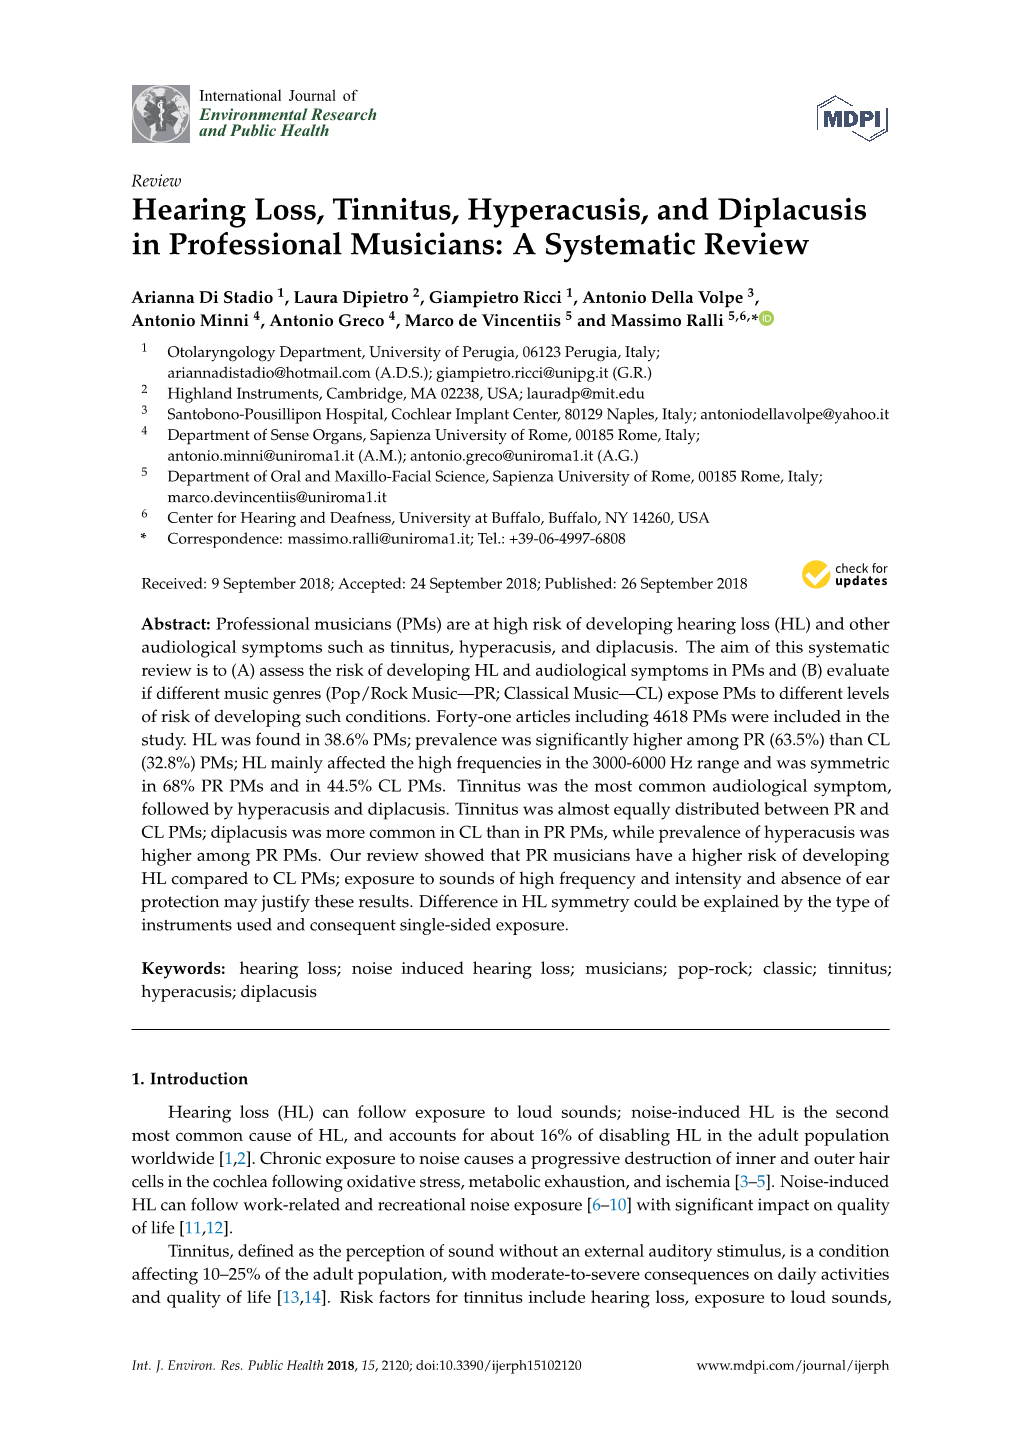 Hearing Loss, Tinnitus, Hyperacusis, and Diplacusis in Professional Musicians: a Systematic Review